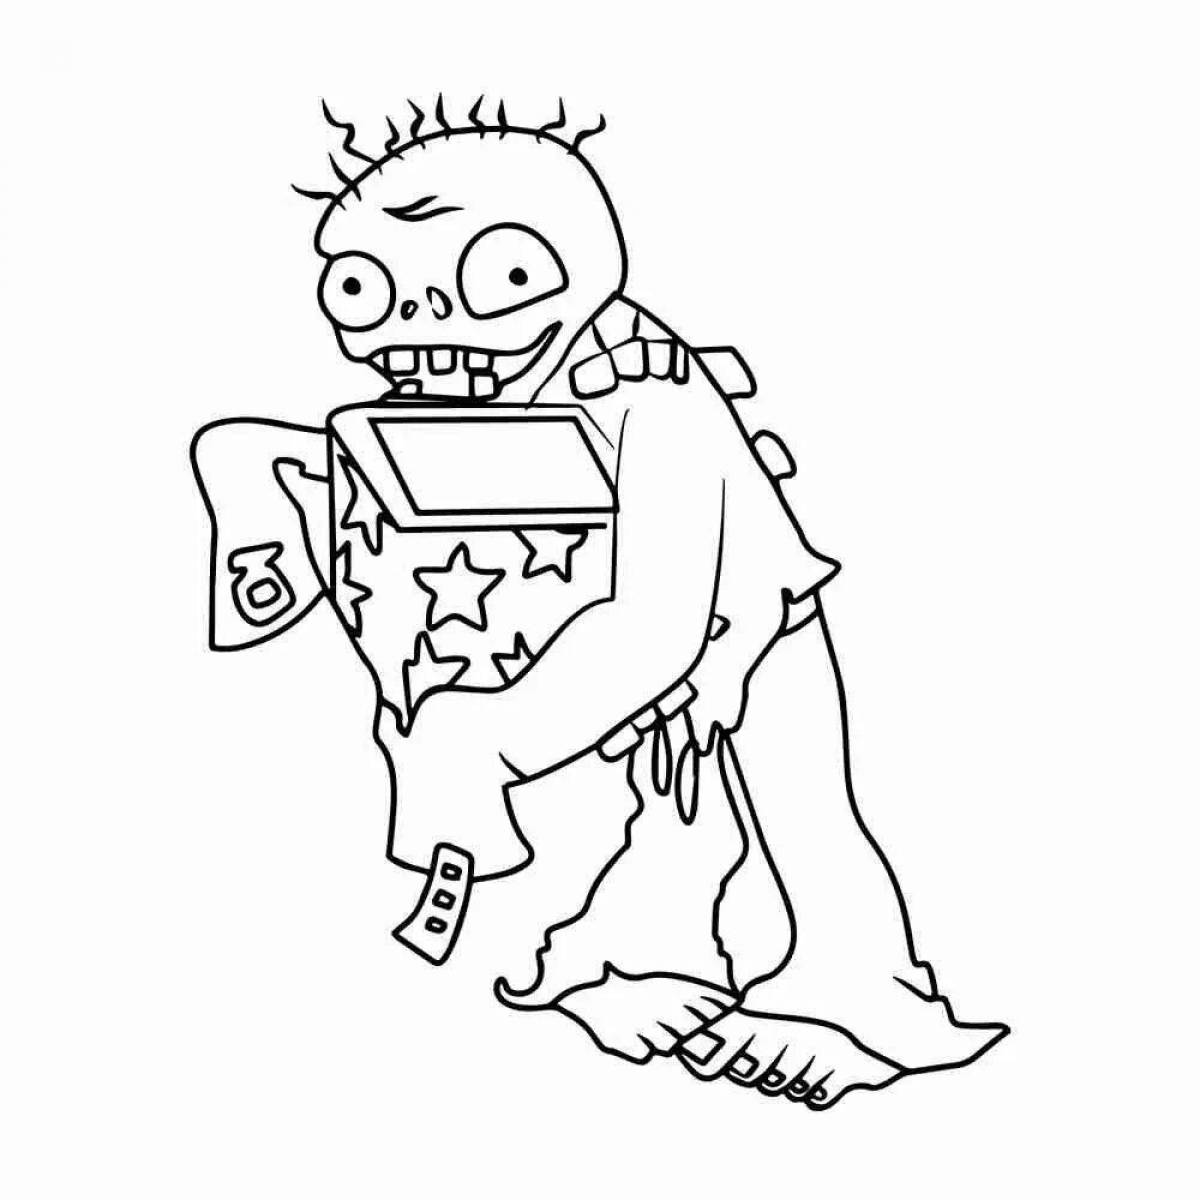 Ugly zombie coloring book